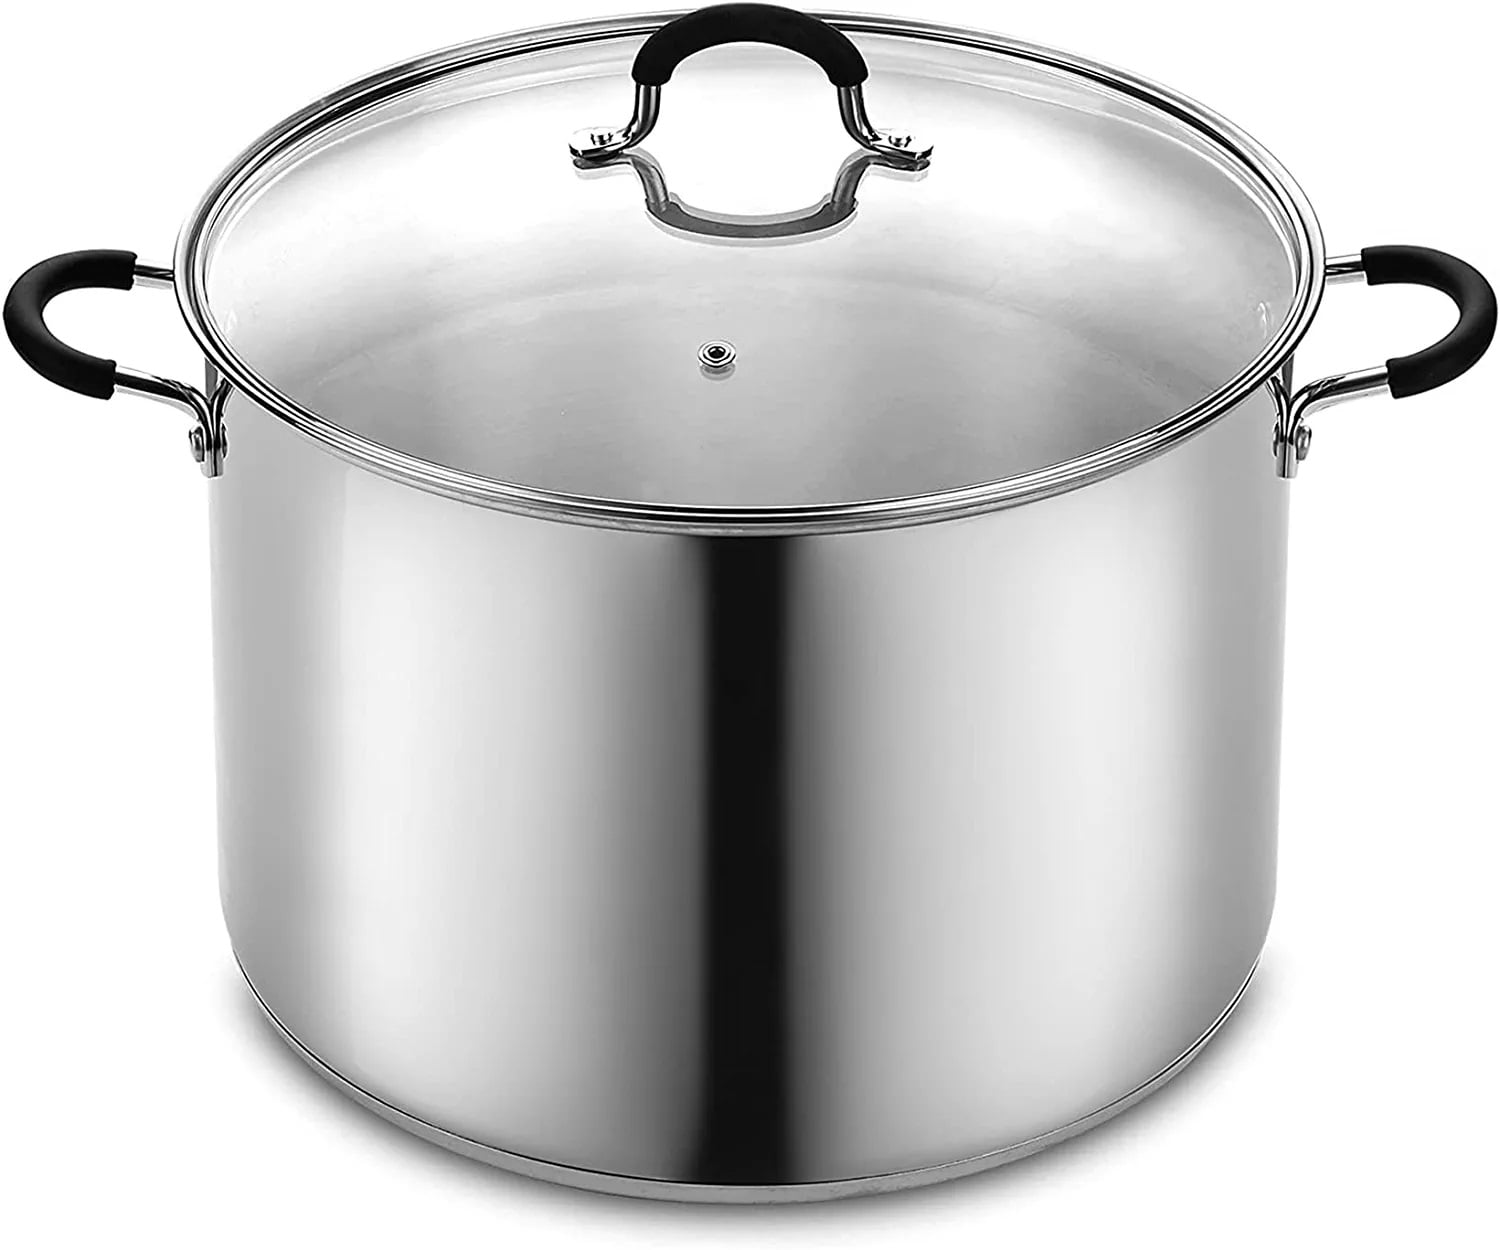 Cook N Home 8 qt. Stainless Steel Stock Pot with Glass Lid 02681 - The Home  Depot